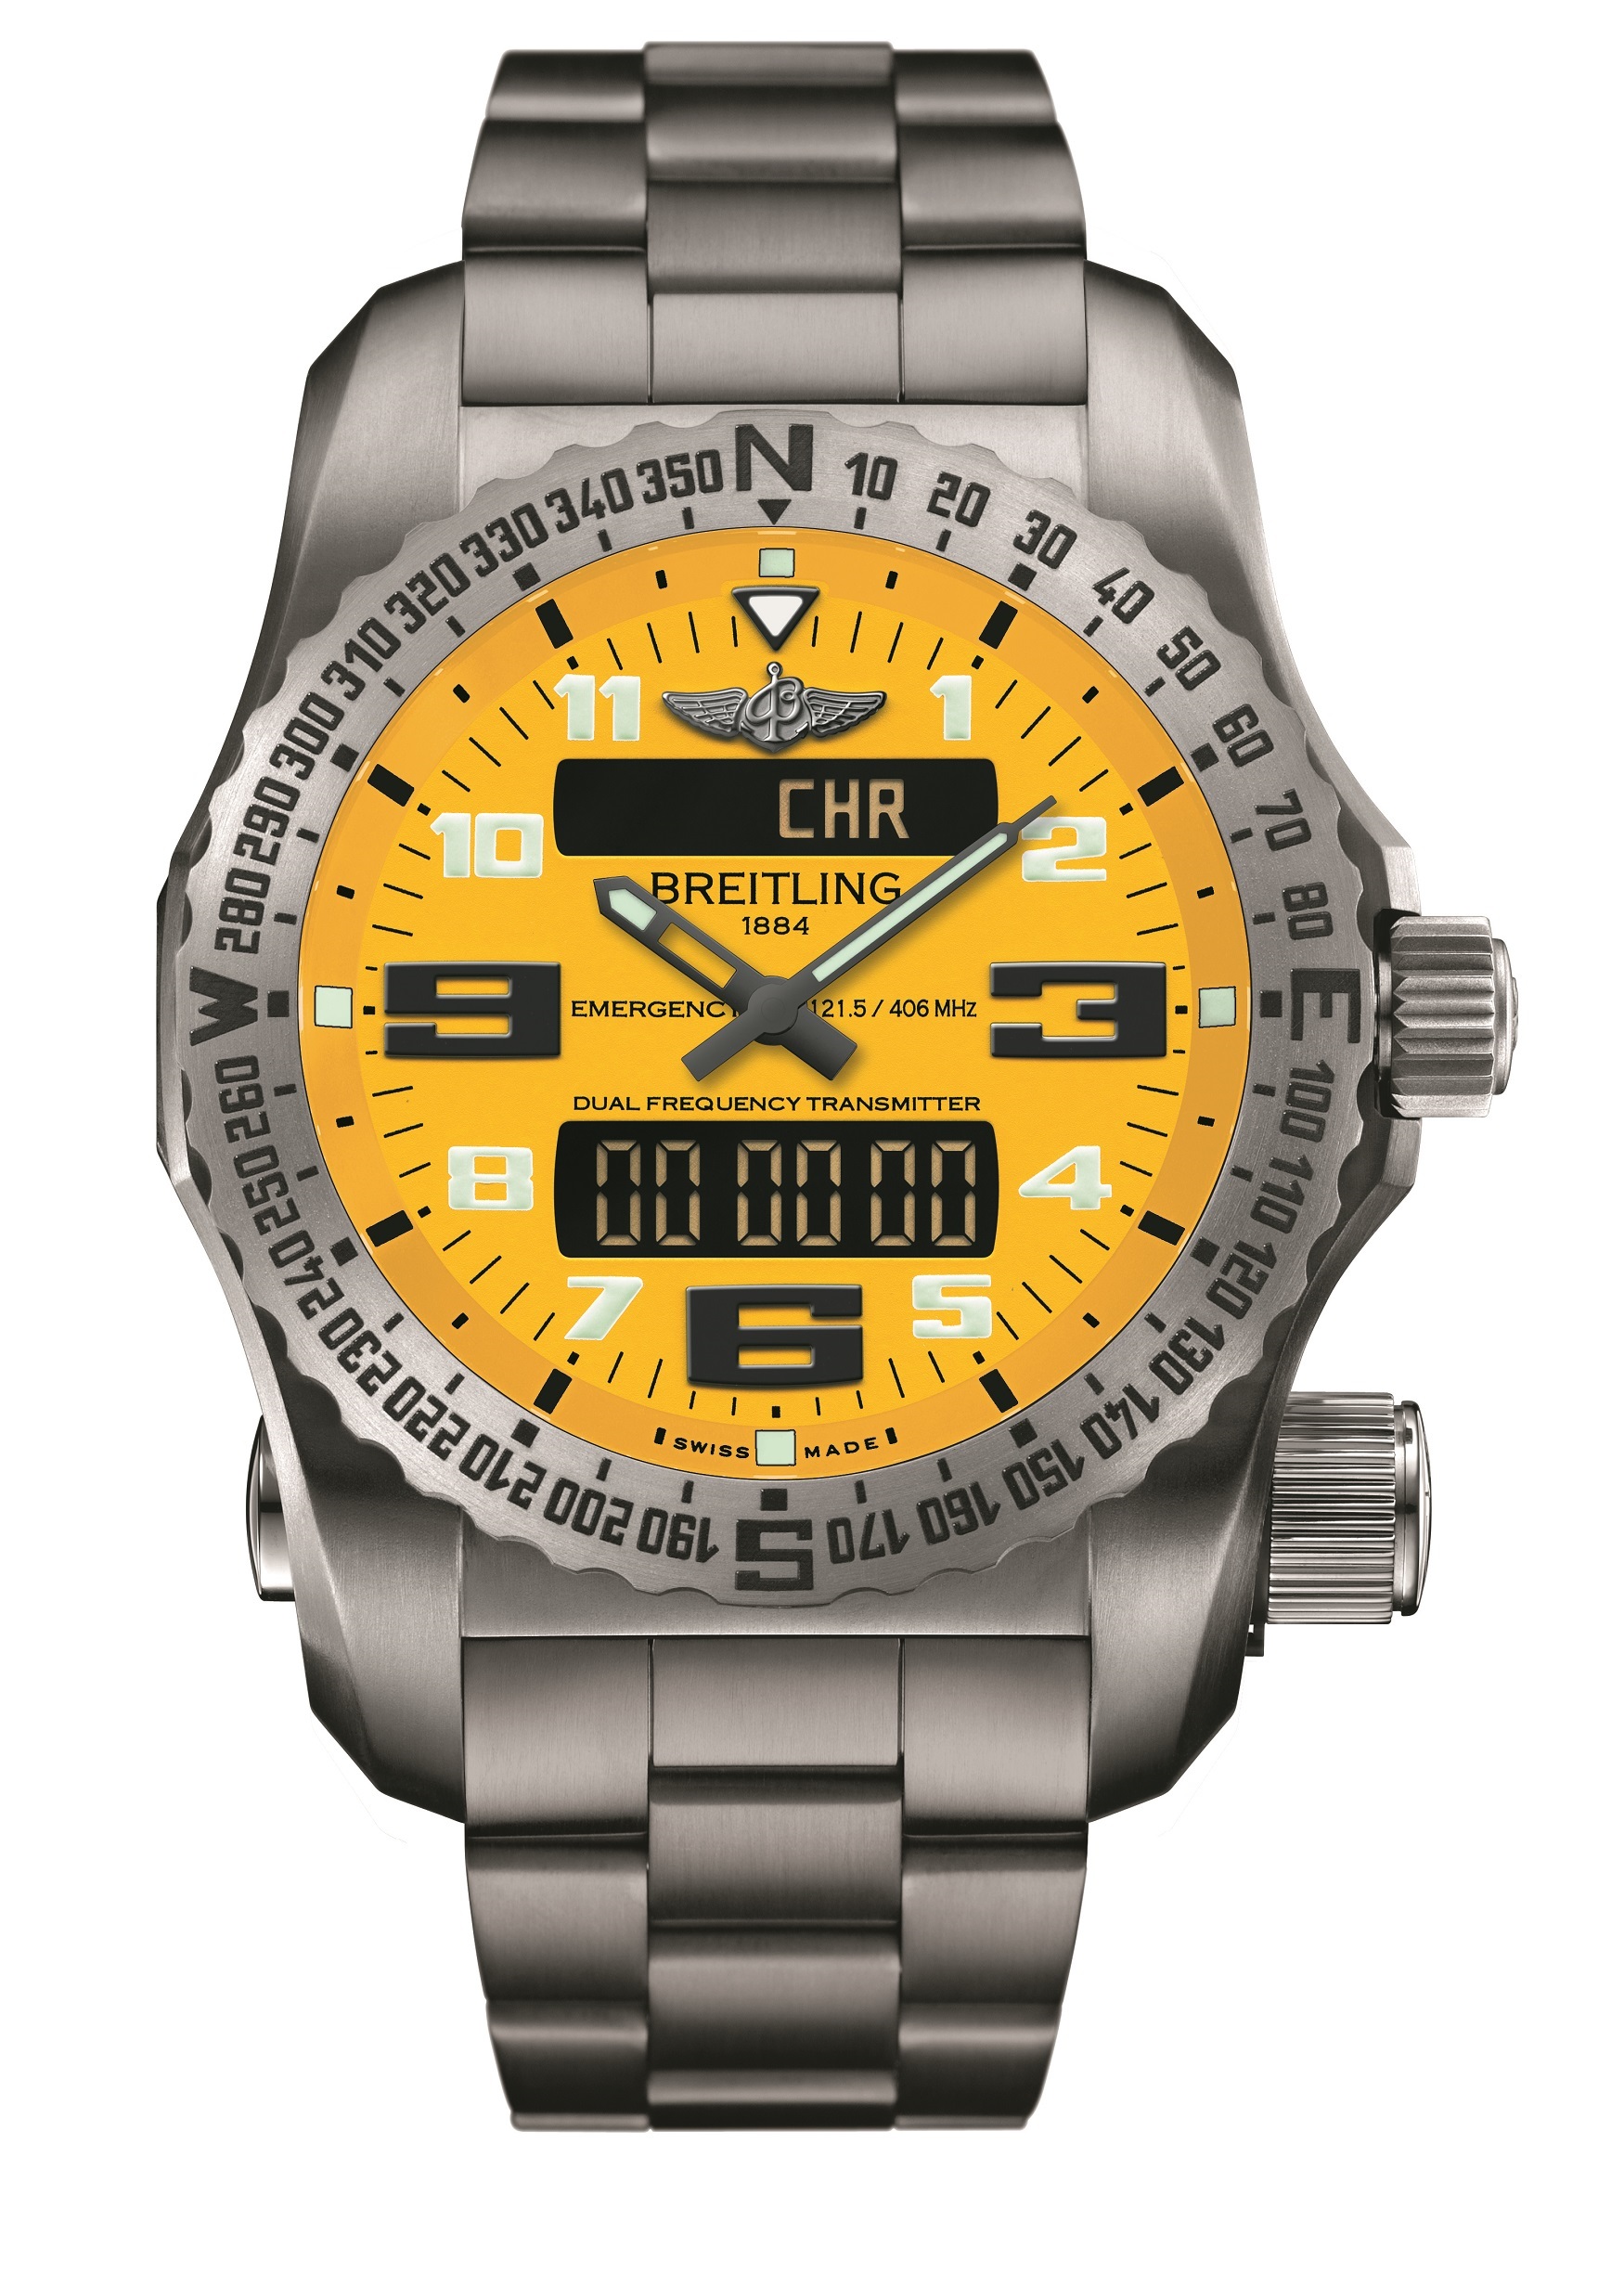 The Breitling Emergency